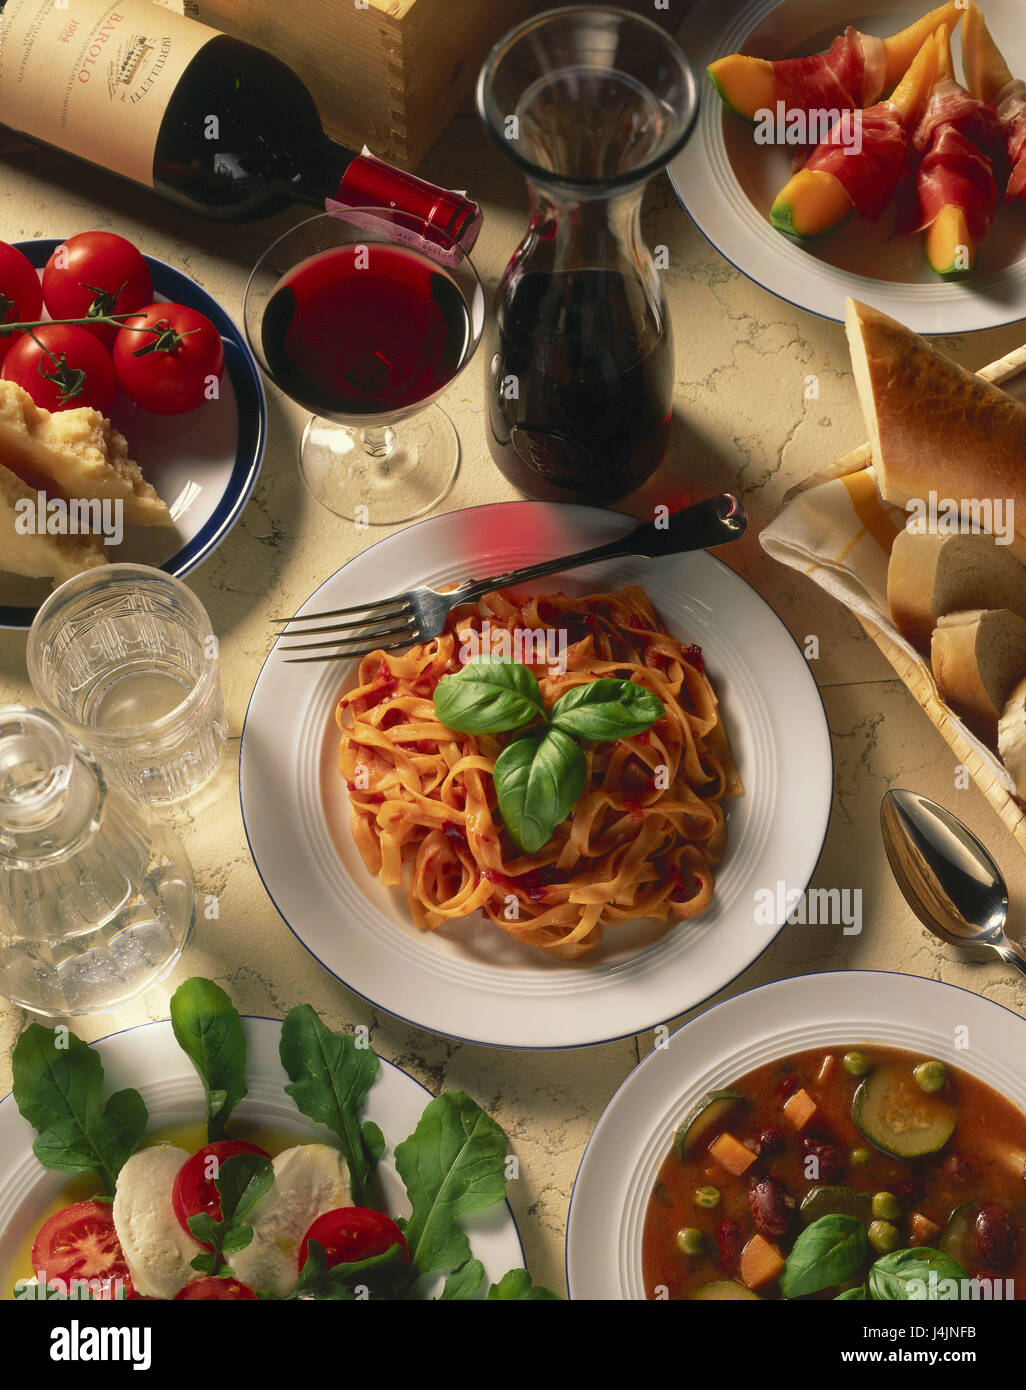 Dishes, drinks, in Italian, specialities still life, object photography, foods, food, hors-d'oeuvre, honeydew melon, melon, bacon, main meal, noodles, pasta dish, tagliatelle Al Pomodoro, Minestrone, vegetable soup, salad, tomatoes, mozzarella, wine, red, wineglass, red wine, alcoholic, alcohol, bread, baguette Stock Photo